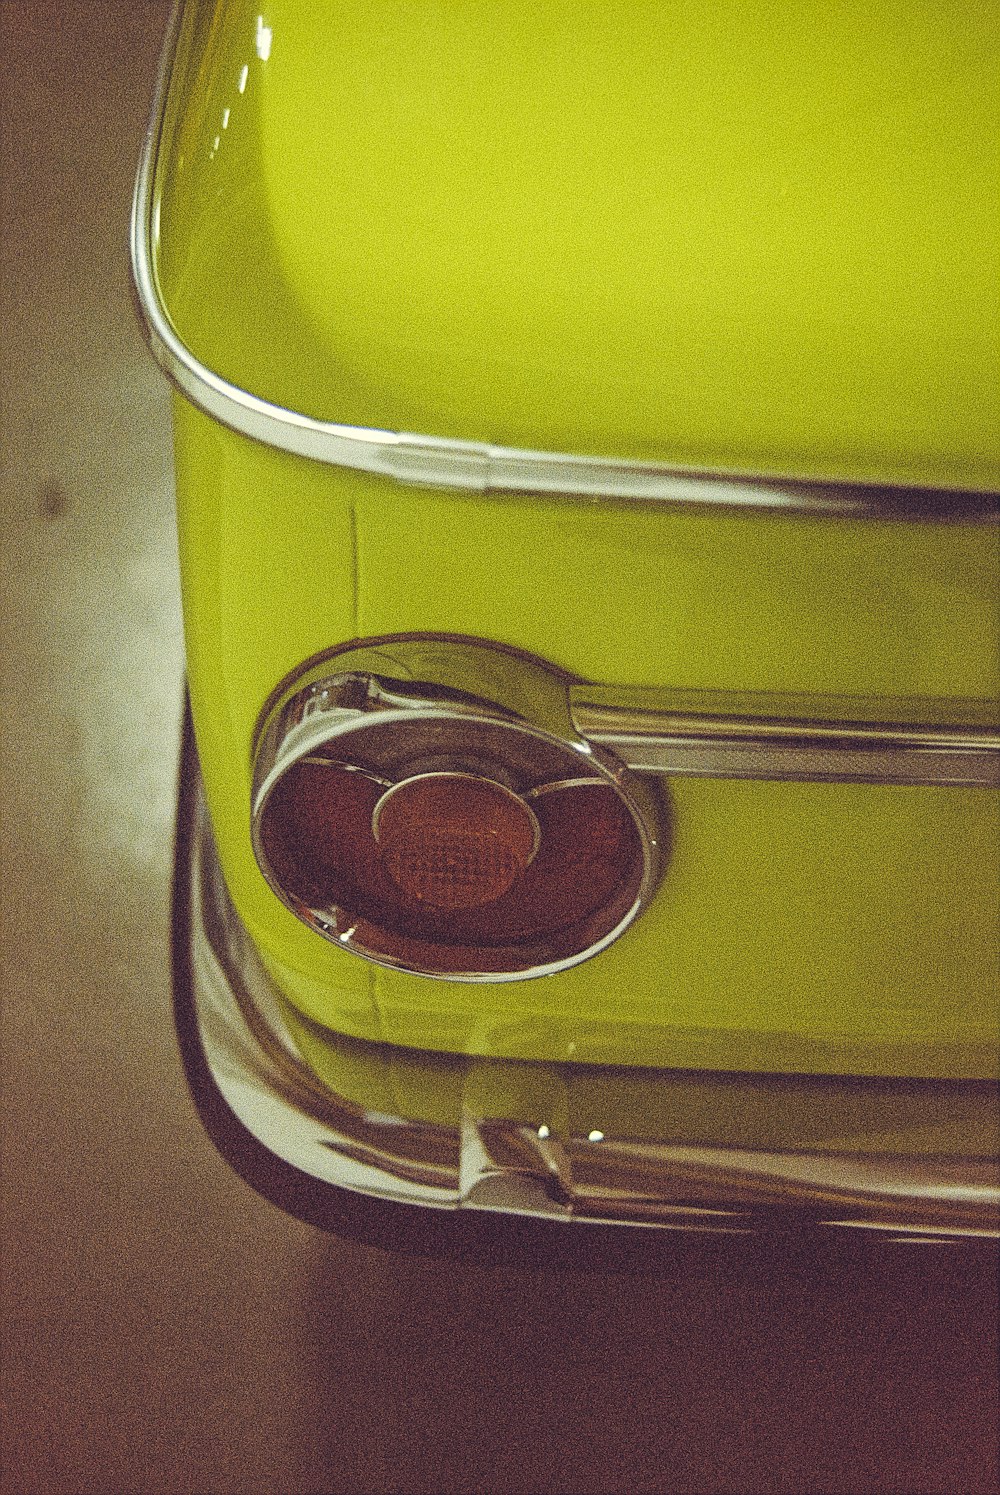 silver round coin on yellow luggage